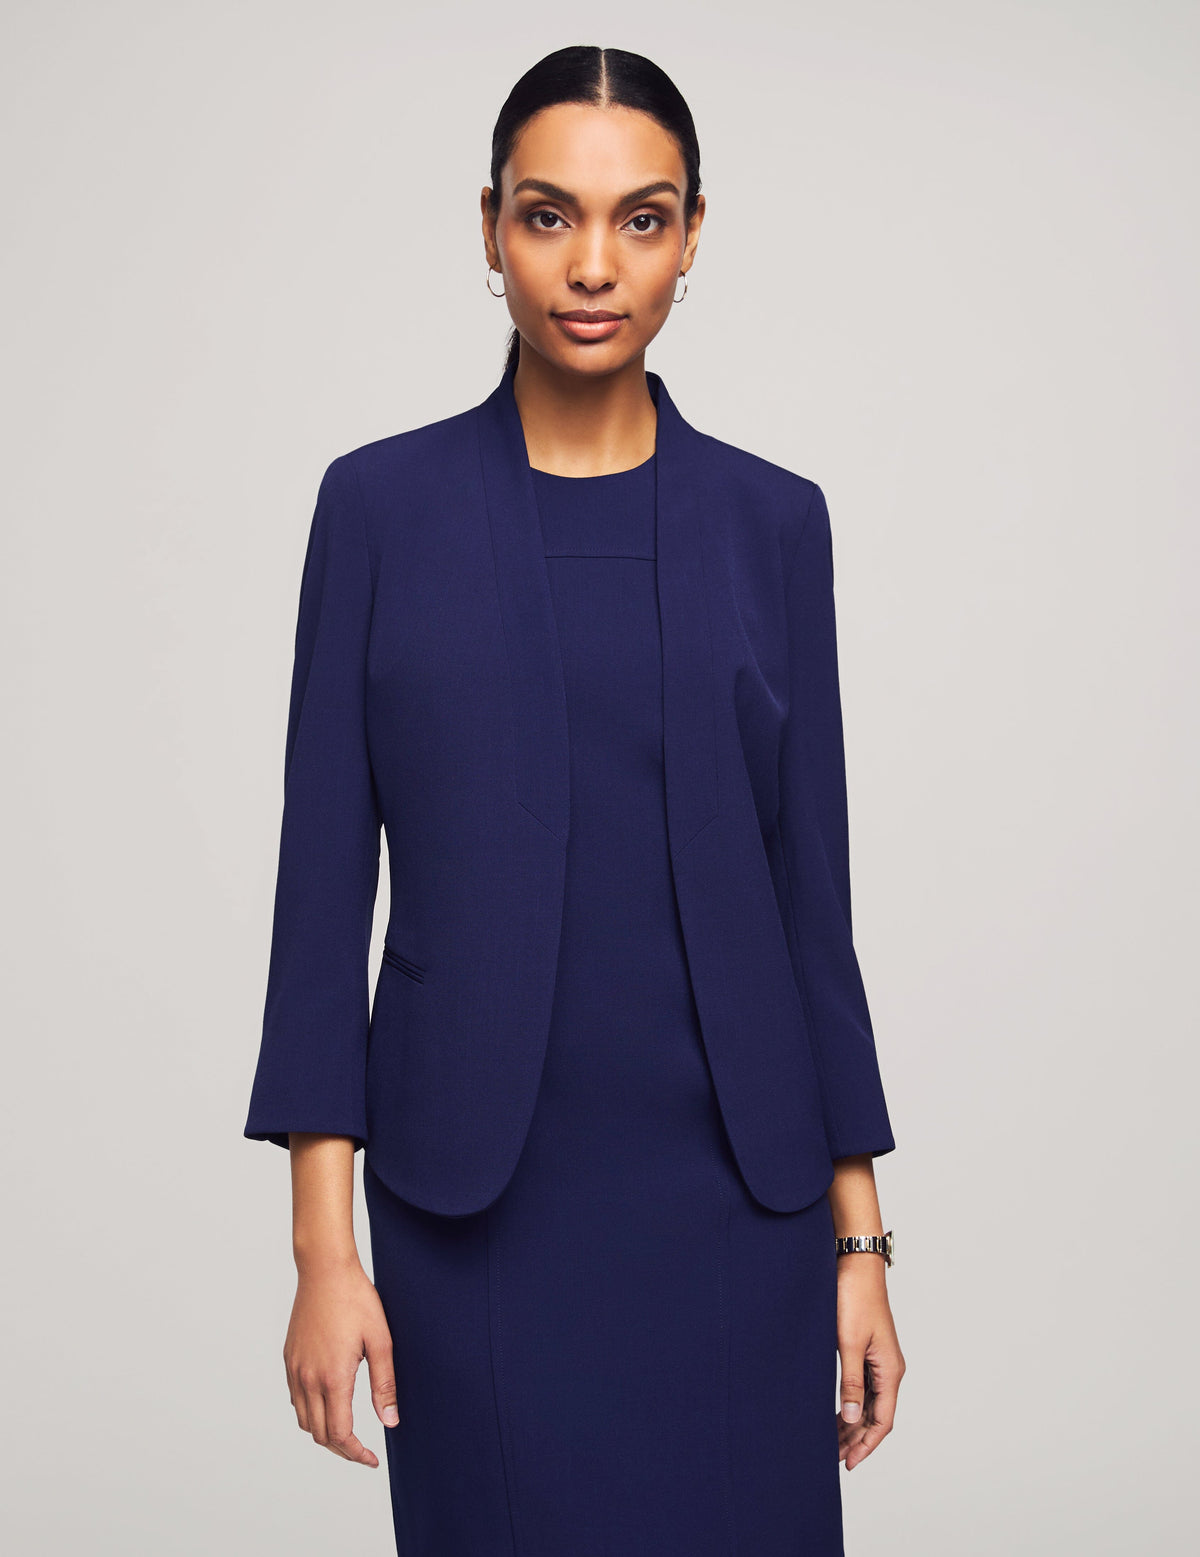 Anne Klein  Executive Collection 2-Pc. Jacket and Dress Set